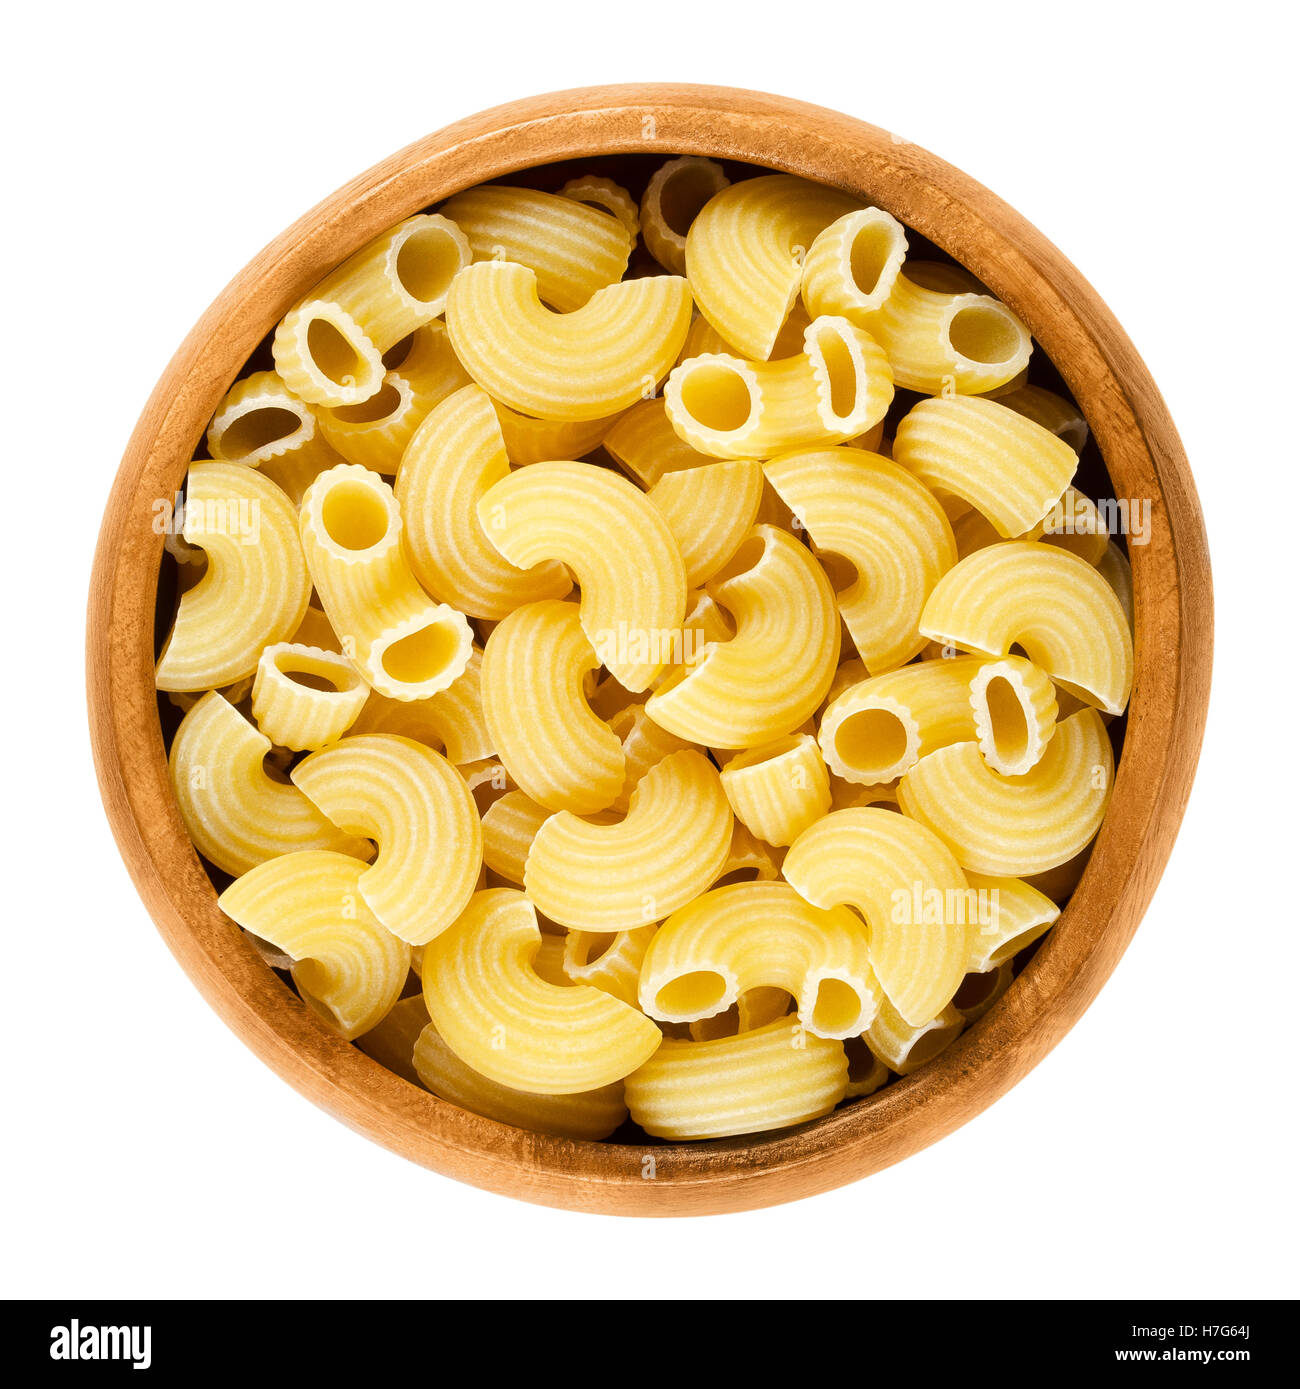 Chifferi pasta in wooden bowl. Bent tubes, short-cut and wide macaroni. Italian noodles prepared with eggs. Stock Photo